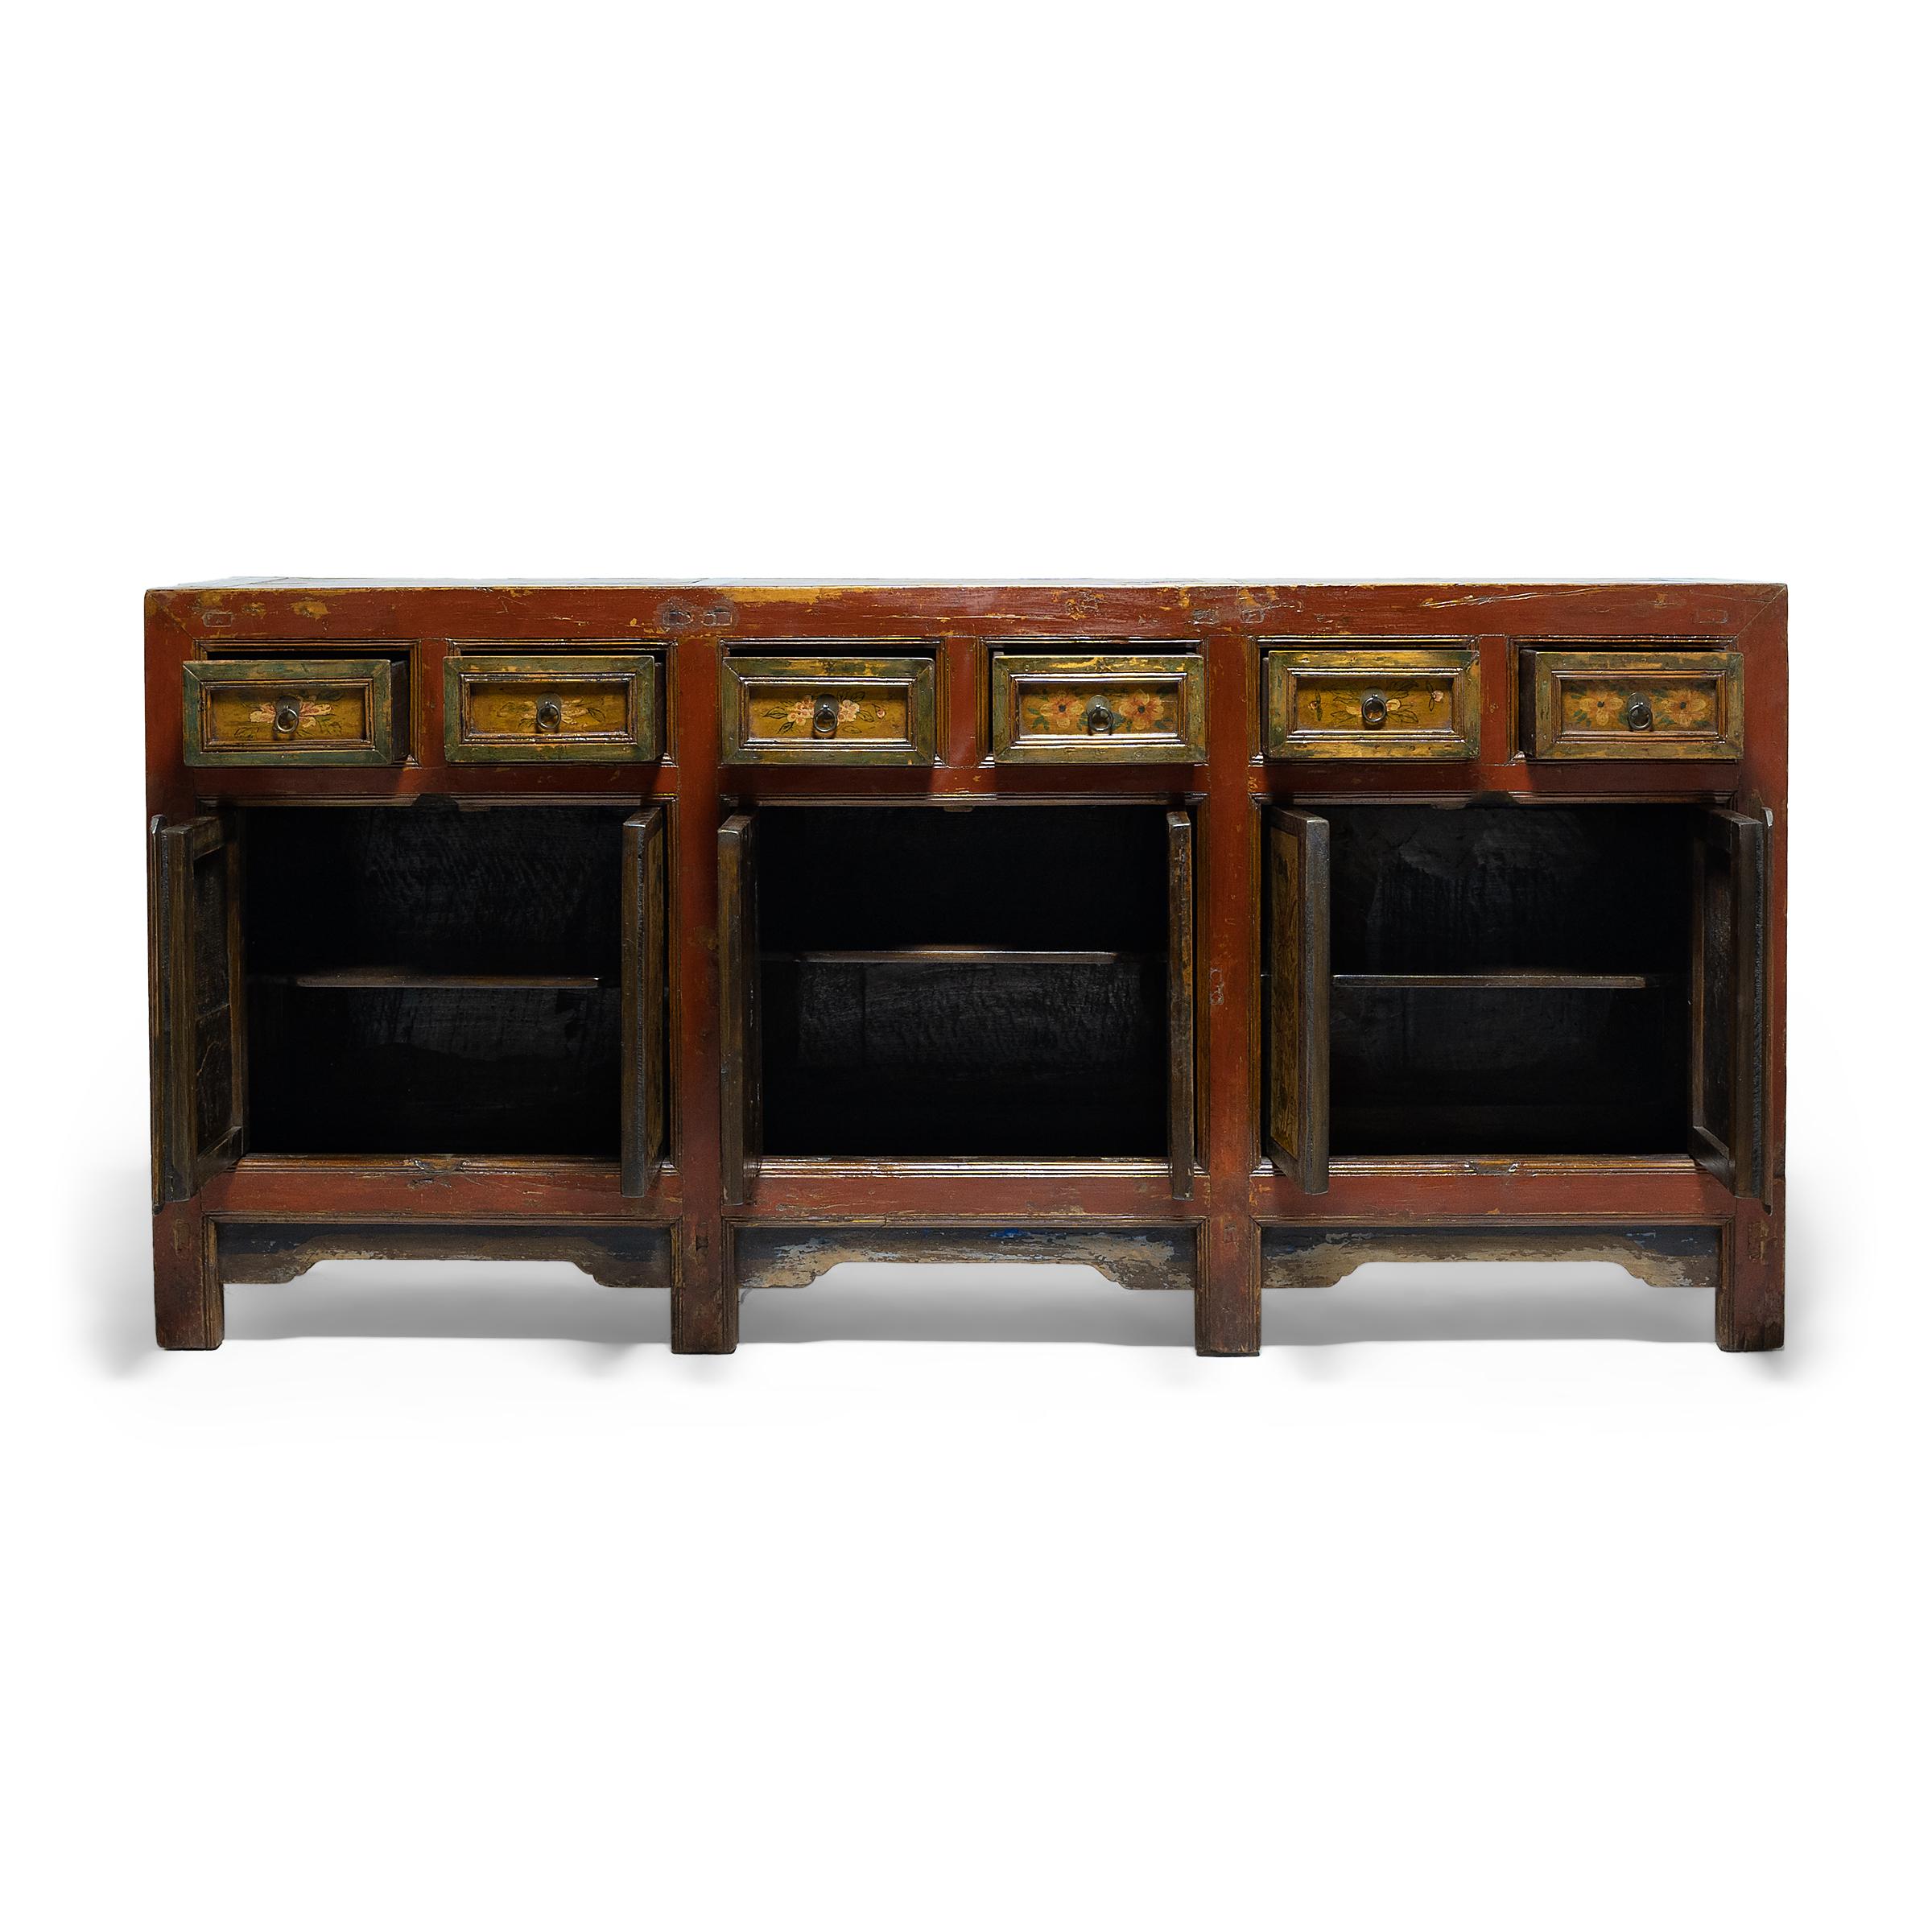 Wood Chinese Provincial Four Seasons Coffer, c. 1900